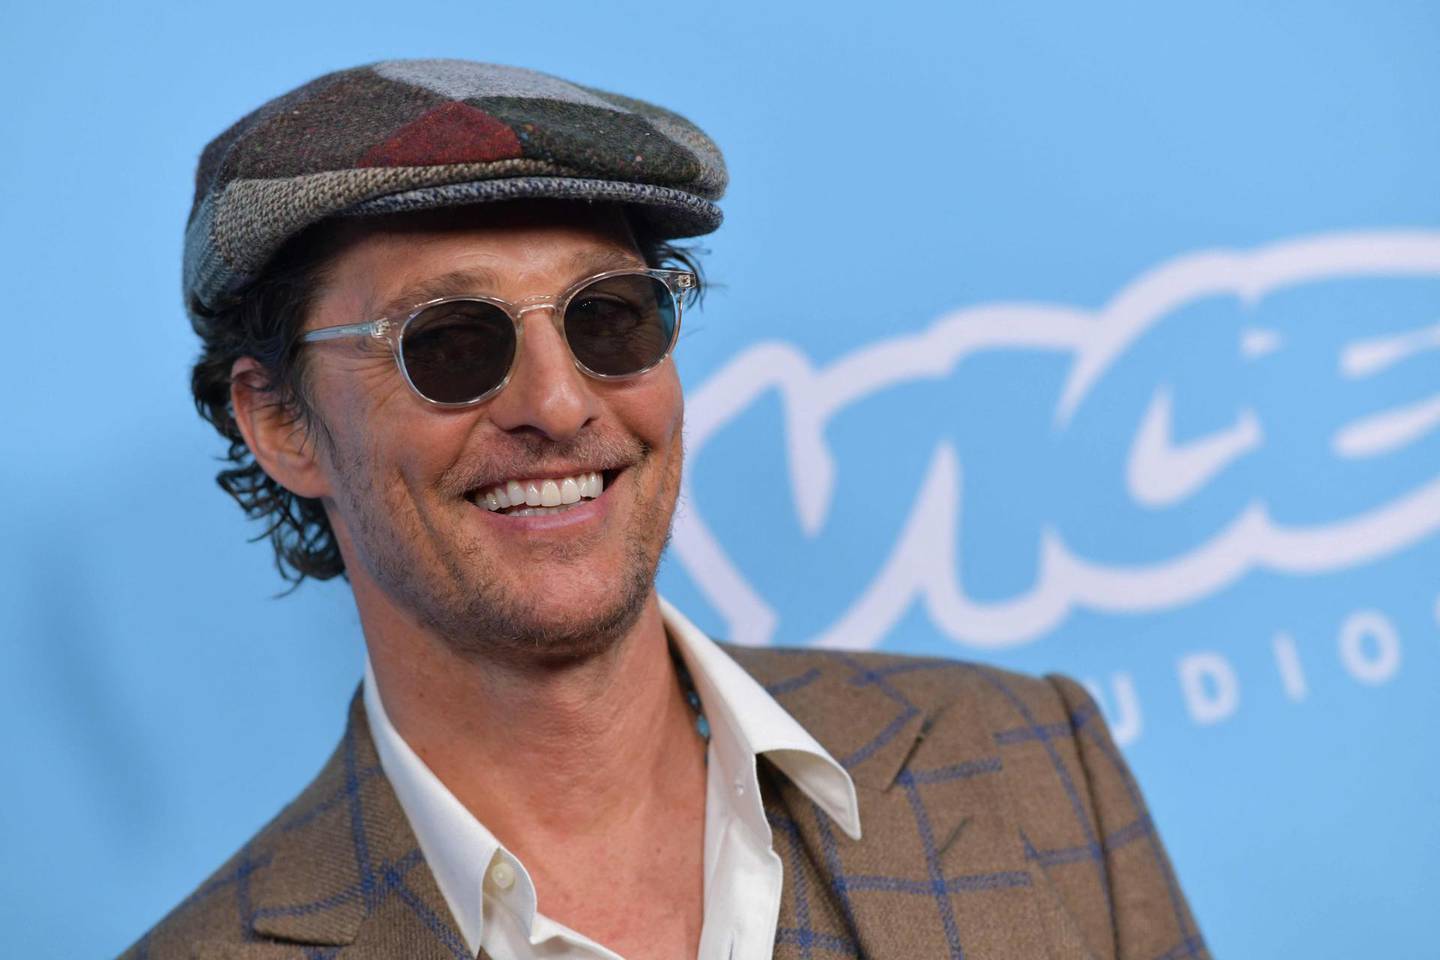 (FILES) In this file photo taken on March 28, 2019, US actor Matthew McConaughey arrives for the Los Angeles premiere of "The Beach Bum" at the Arclight Cinemas in Hollywood. McConaughey is preparing for the first shots of what he says will be a "100-year war" when Austin F.C. make their much-anticipated Major League Soccer bow this weekend, the actor said on April 13, 2021. The Hollywood star is a minority owner in the MLS expansion side and is determined to help the club successfully embed itself in his hometown as the franchise's "minister of culture." / AFP / Chris Delmas
